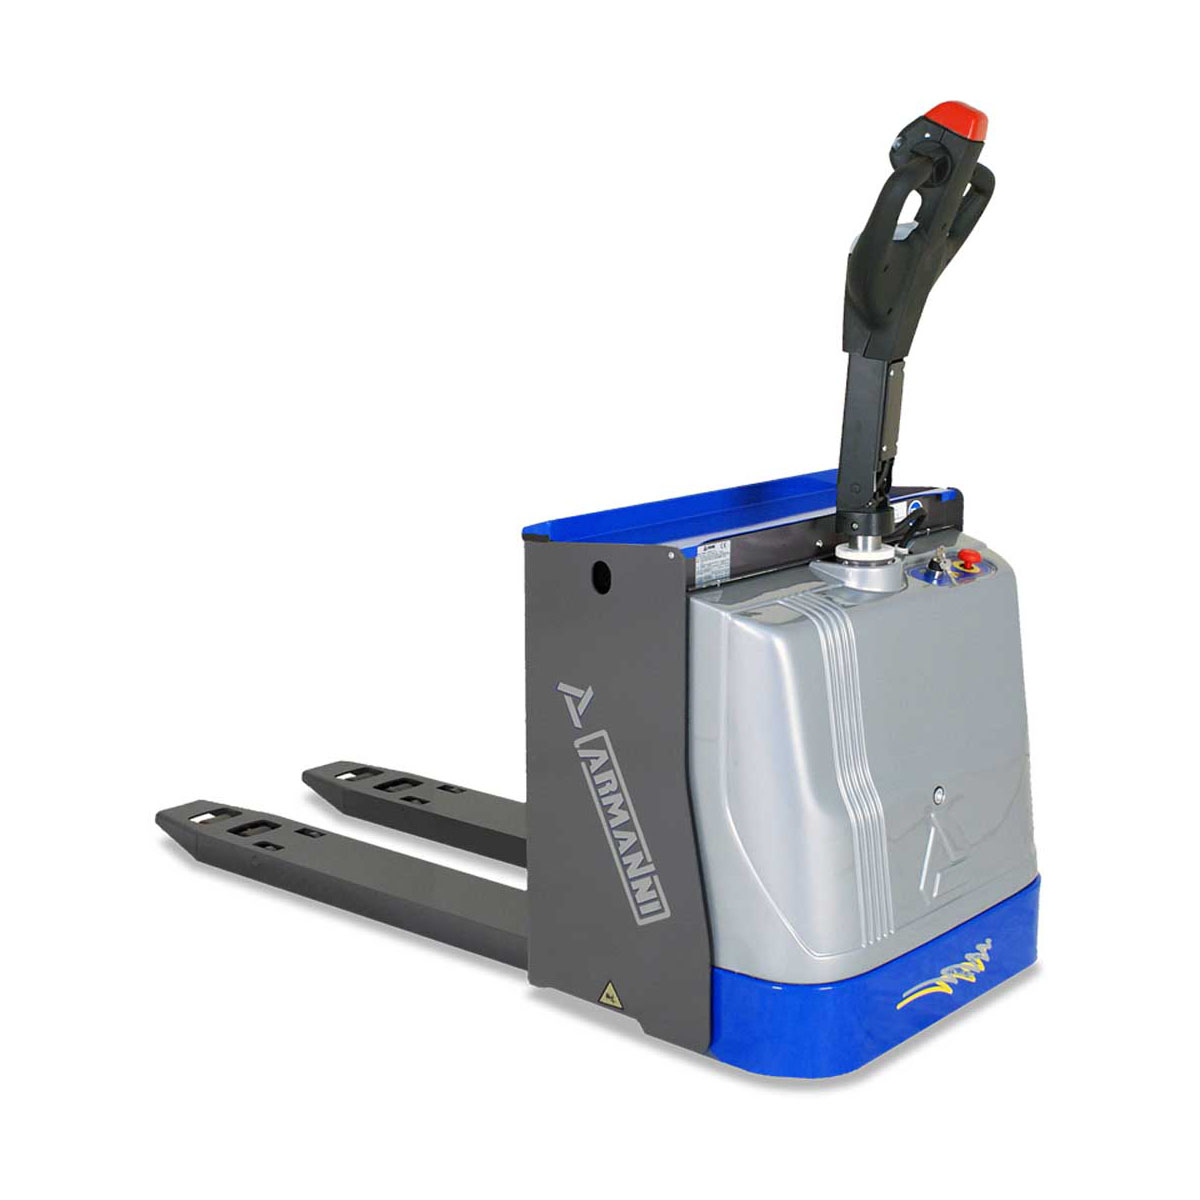 Buy Electric Pallet Trucks - DISCOVERY in 2-Way Pallet Trucks from Armanni available at Astrolift NZ